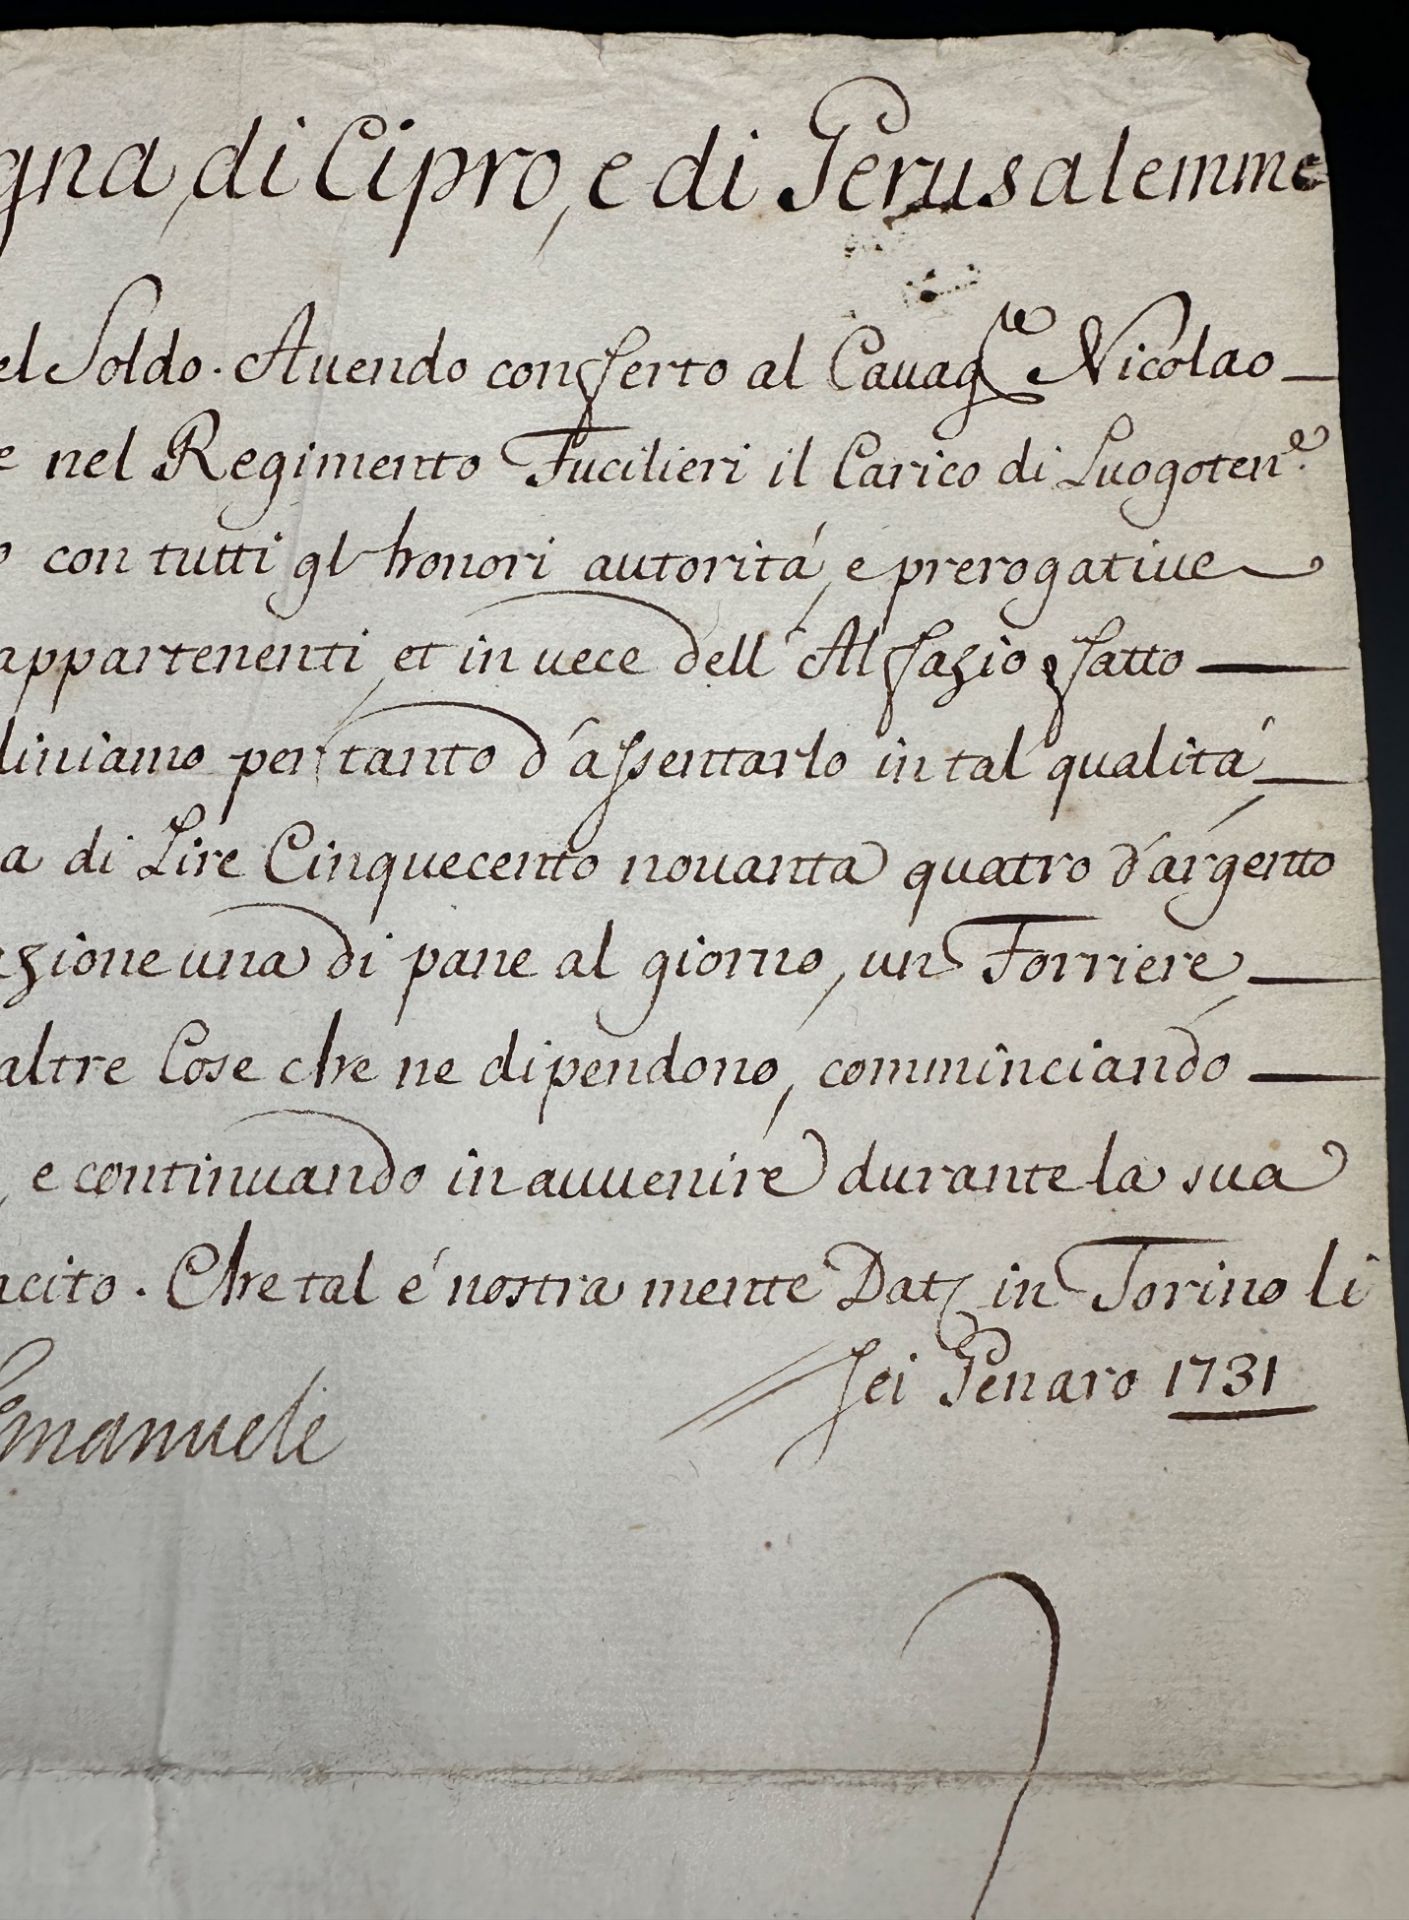 Certificate of appointment of Charles Emmanuel III, King of Sardinia, Duke of Savoy. 1731. - Image 3 of 20